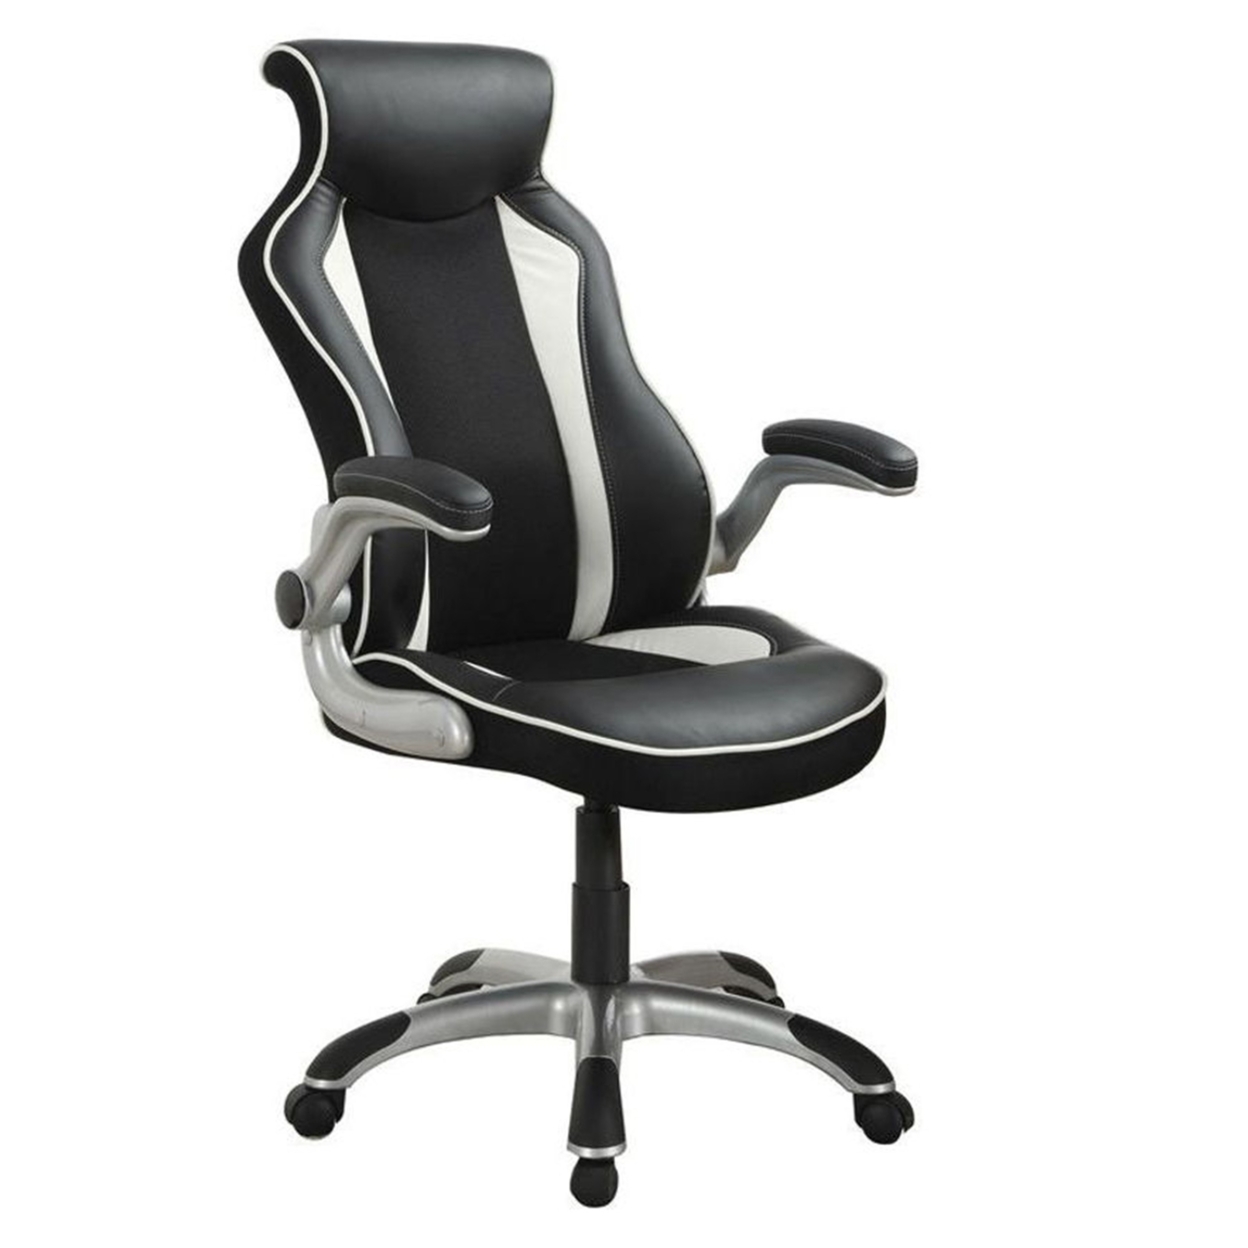 Fancy Executive High Back Leather Chair, Black And White- Saltoro Sherpi